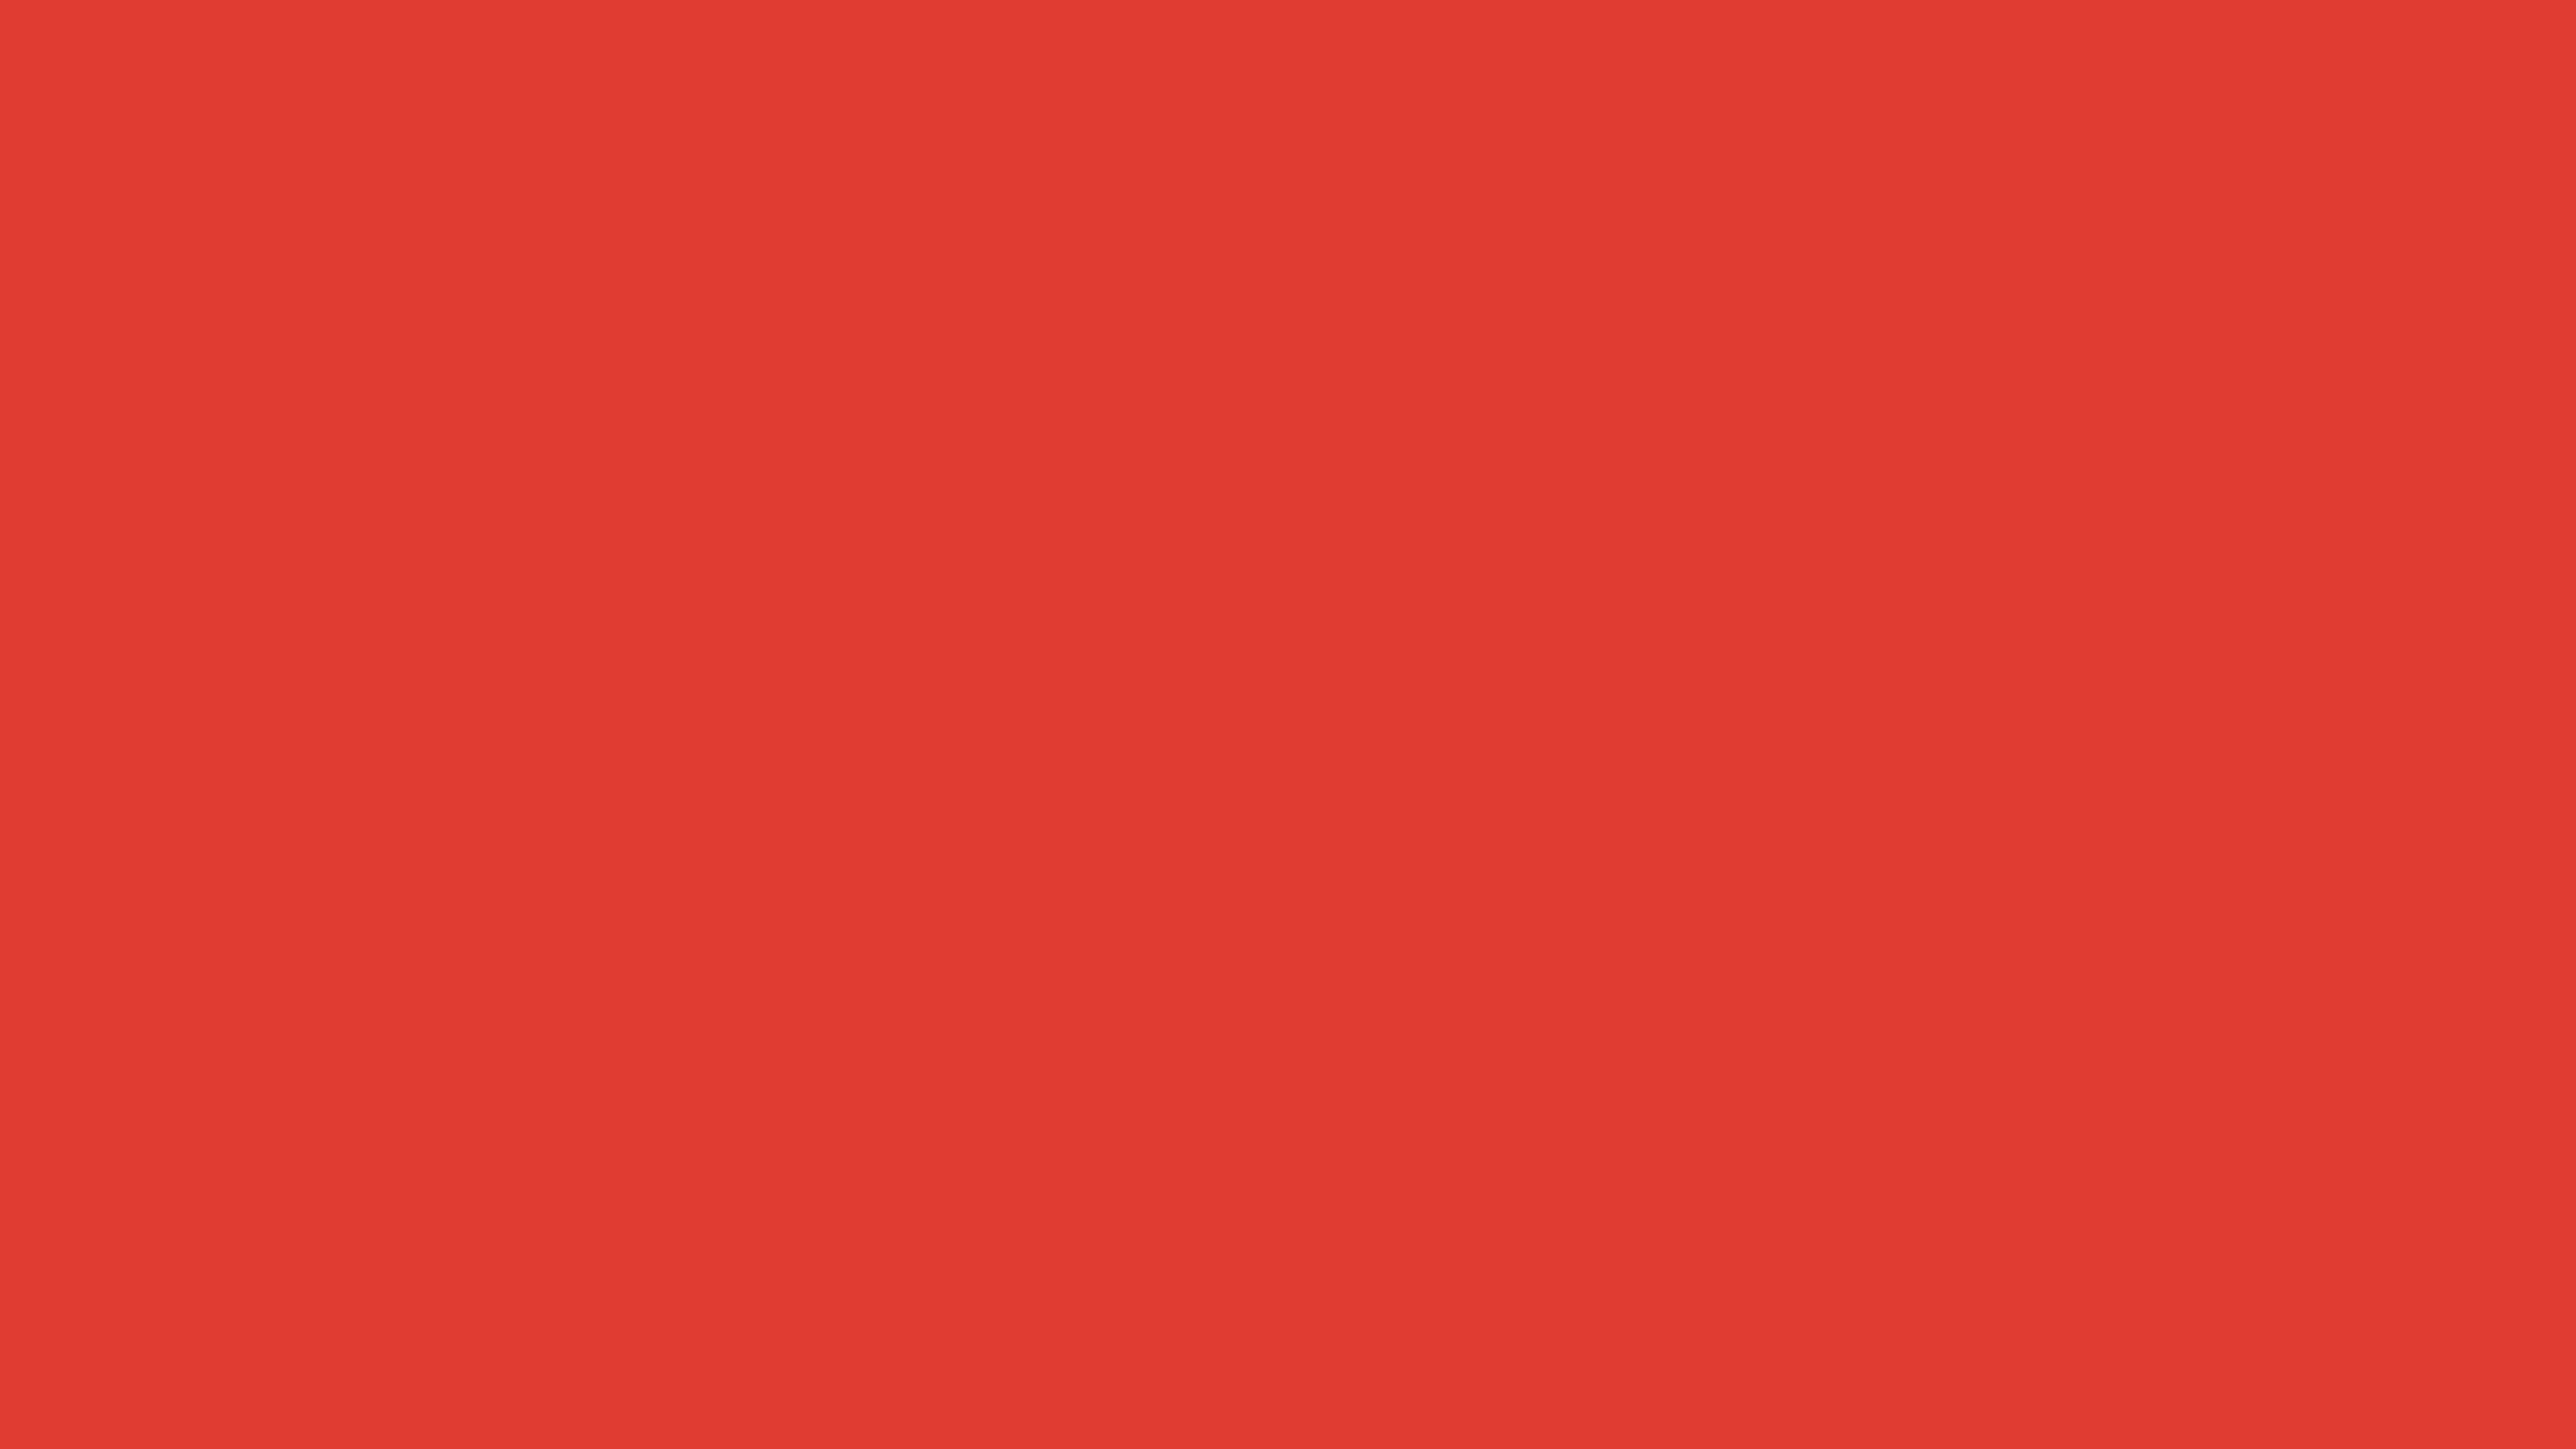 7680x4320 CG Red Solid Color Background